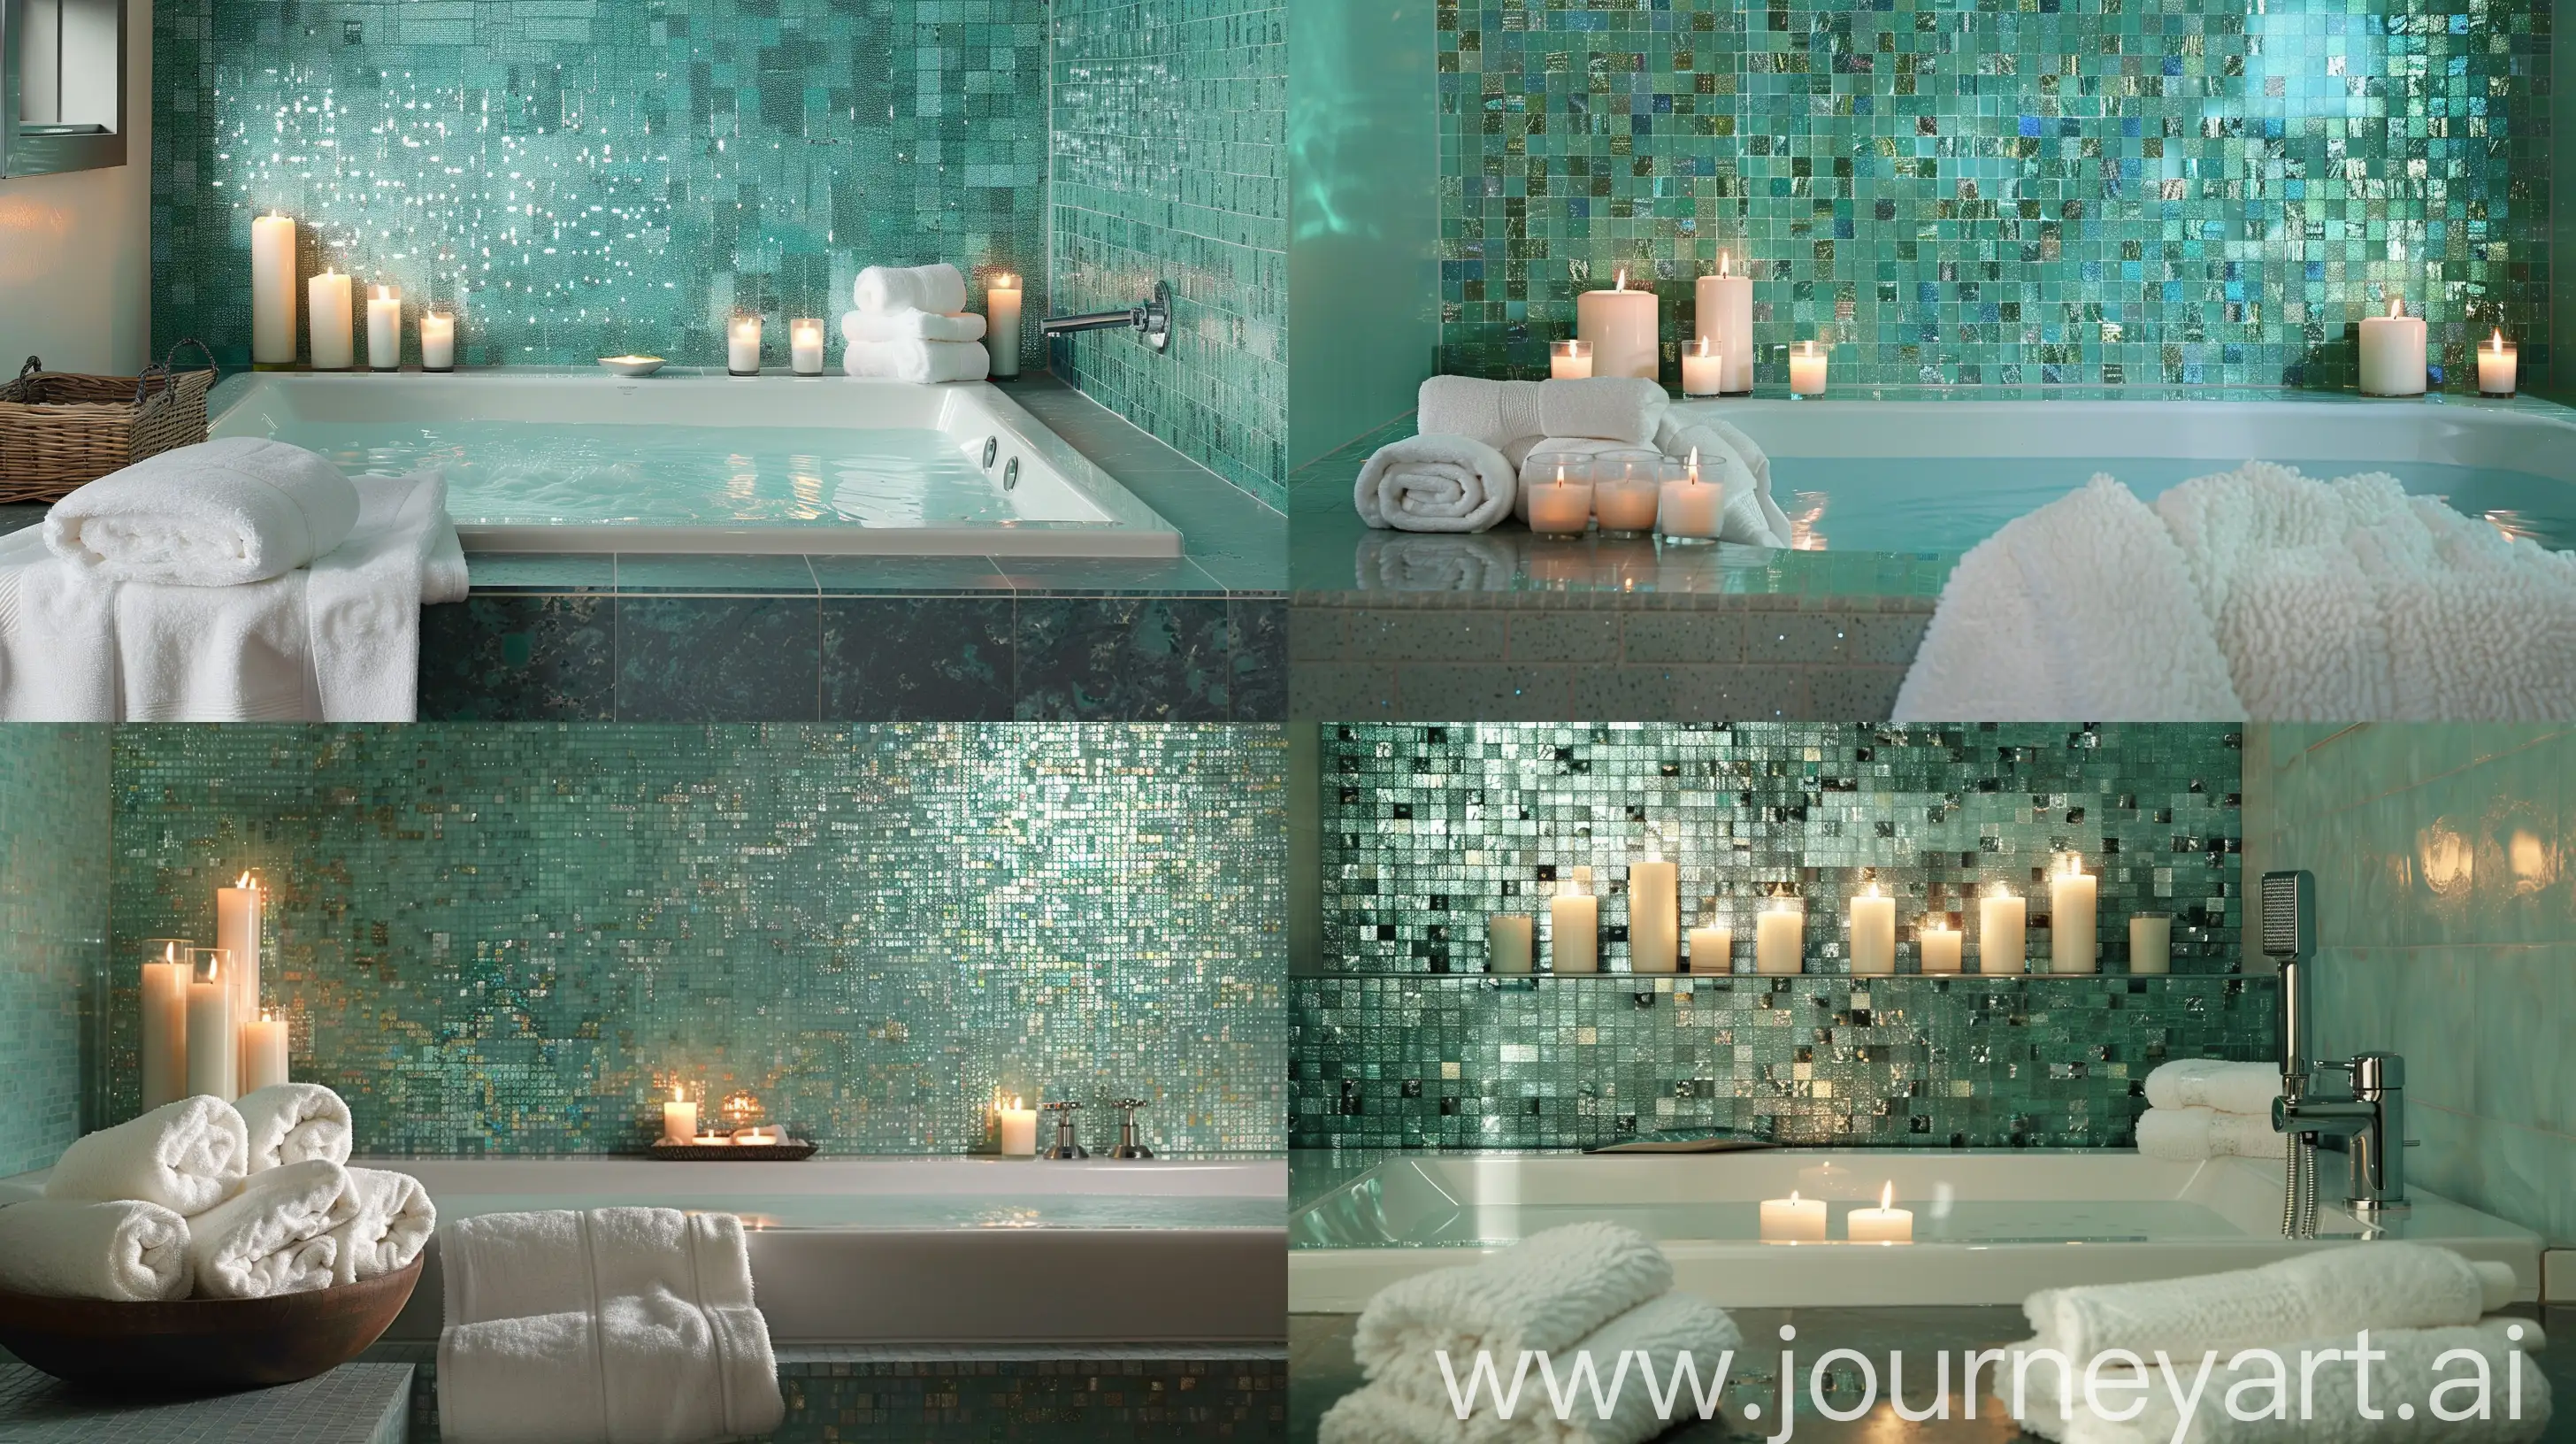 Luxurious-SpaInspired-Bathroom-with-Deep-Soaking-Tub-and-Shimmering-Mosaic-Tiles